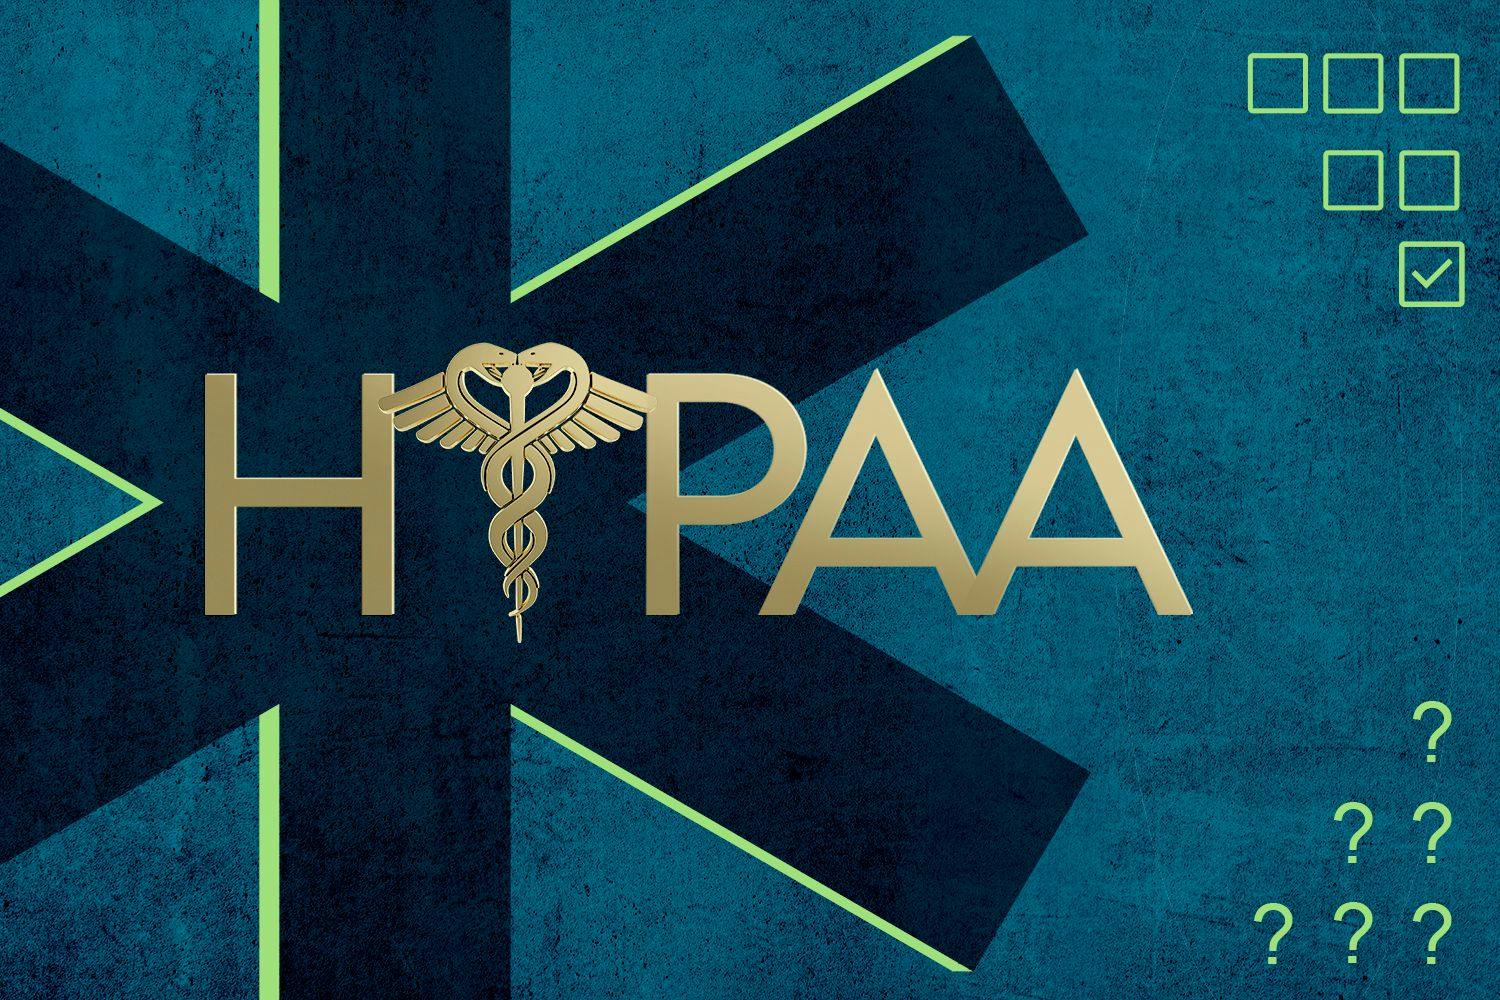 A blue and black illustration of a medical cross with the words "HIPAA" emblazoned across the front